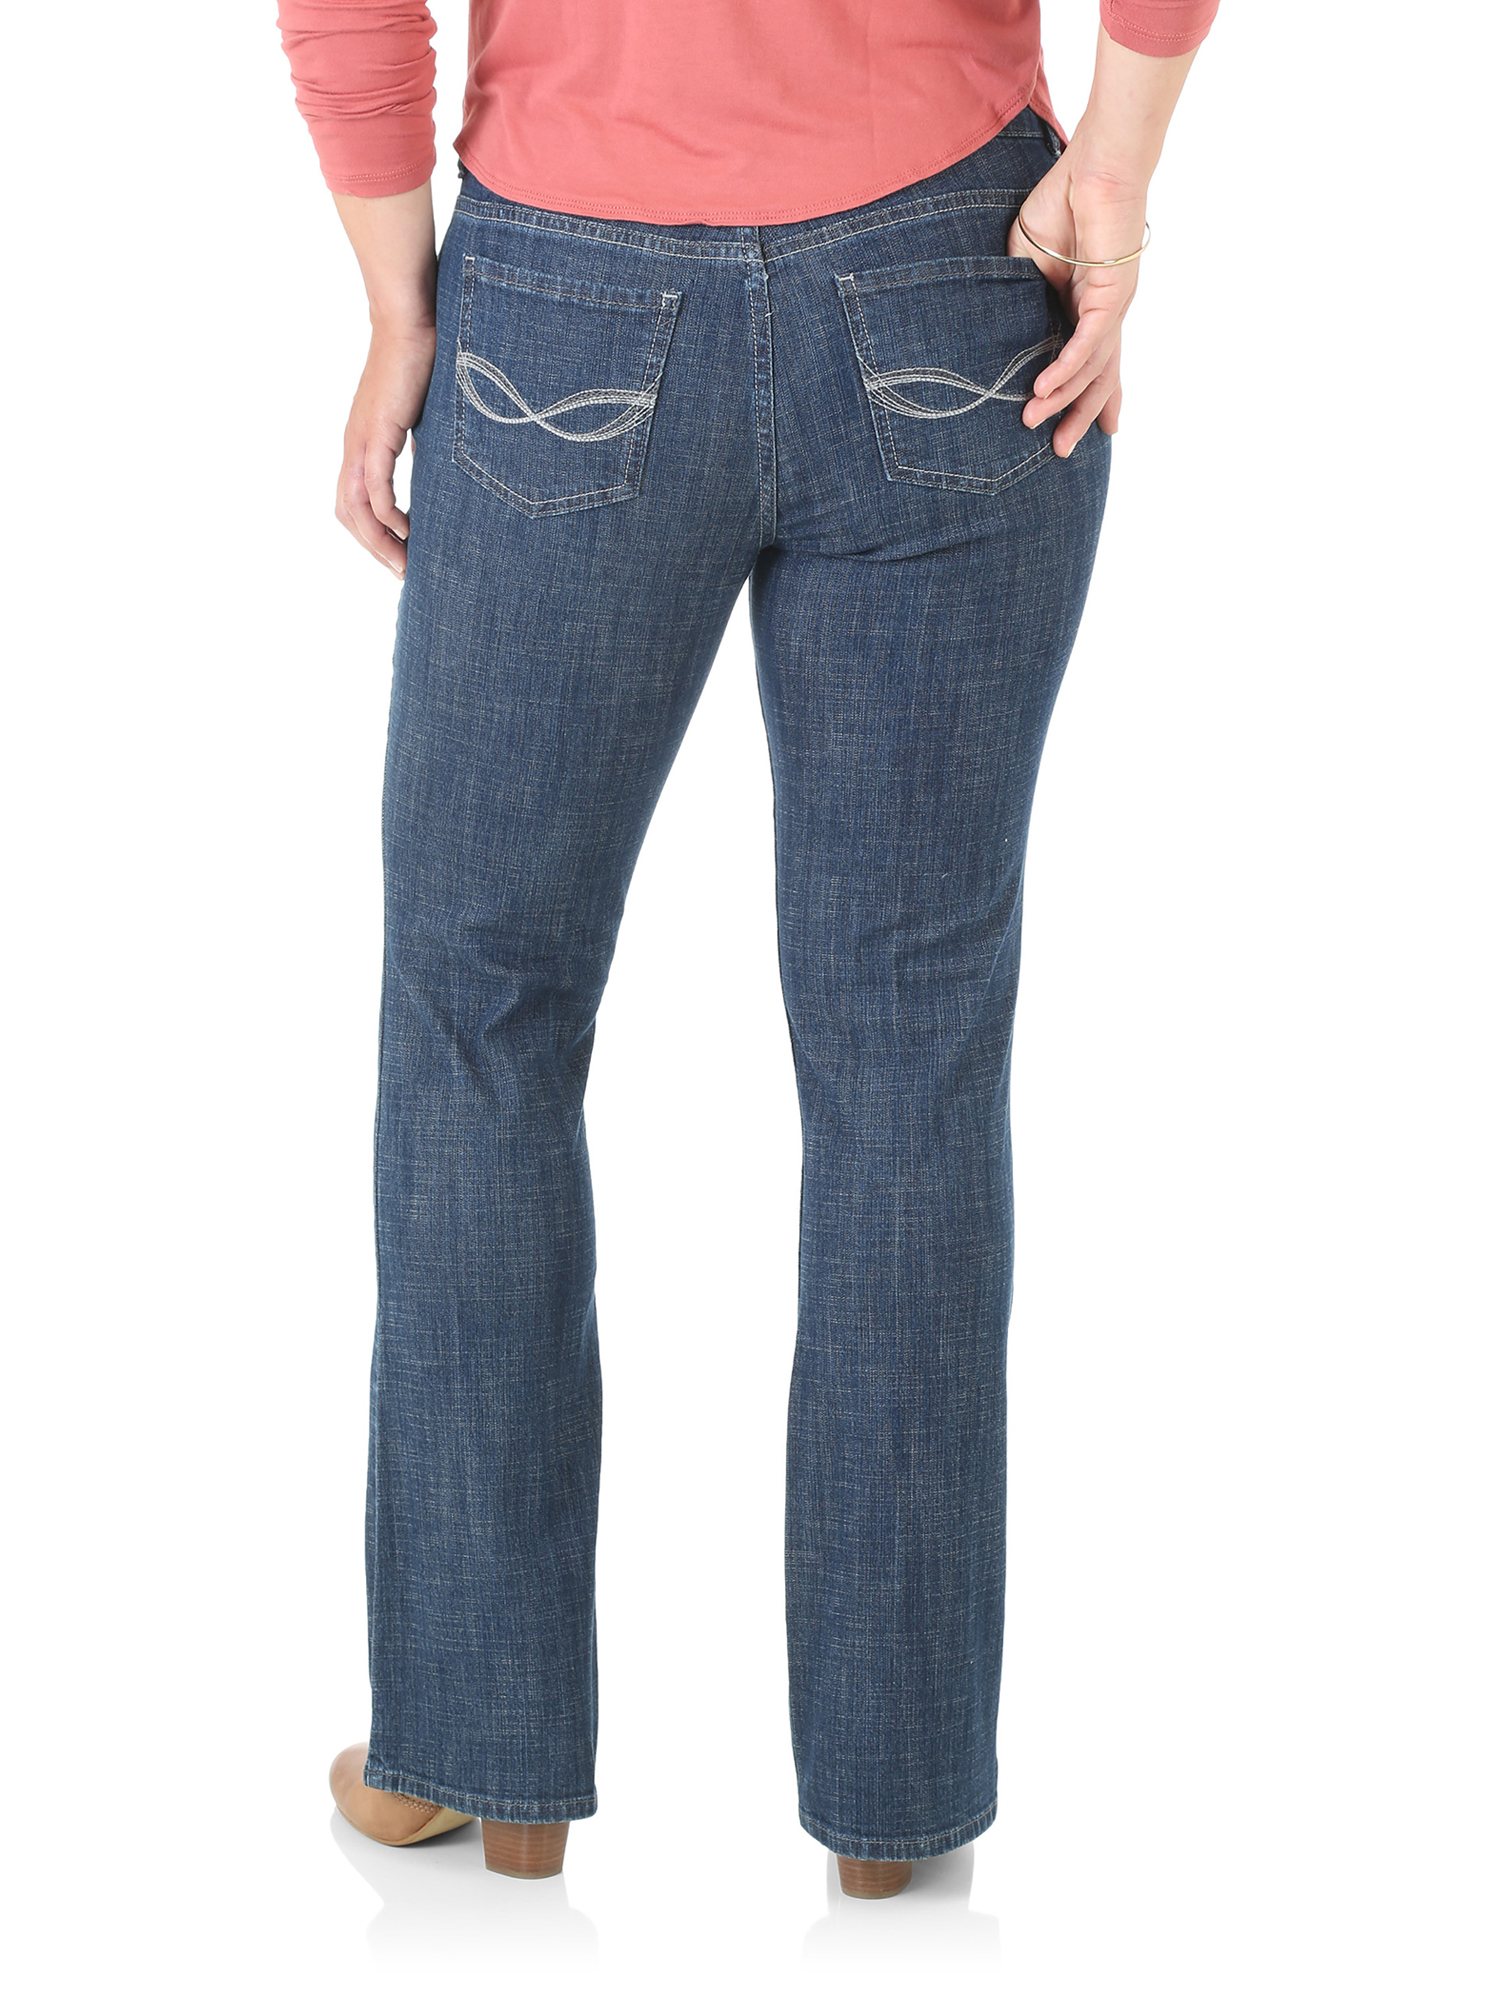 Women's Slender Stretch Bootcut Jean - image 3 of 4